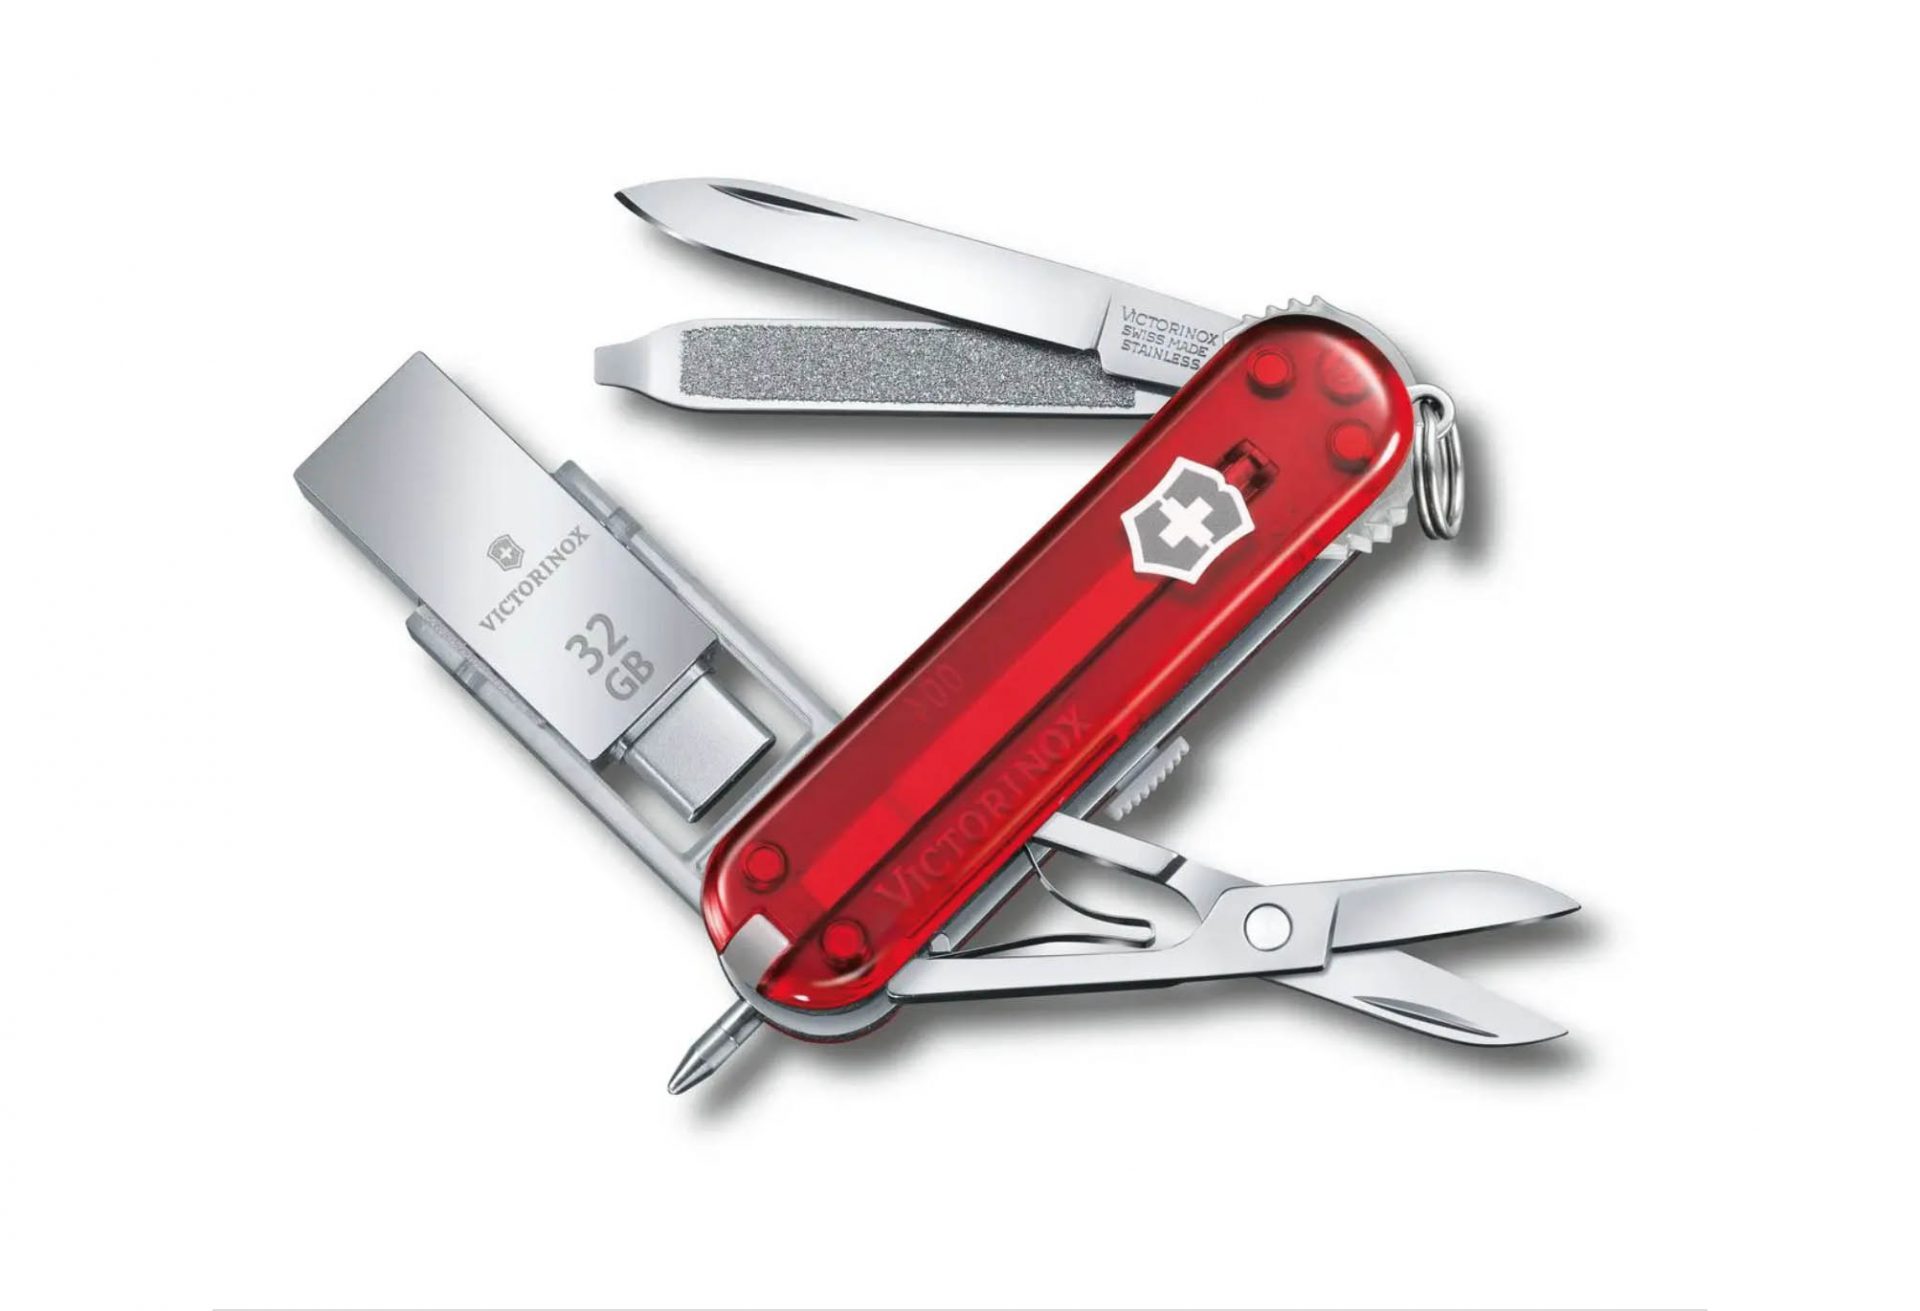 http://designwanted.com/wp-content/uploads/2022/02/Swiss-army-knife-7-scaled.jpg